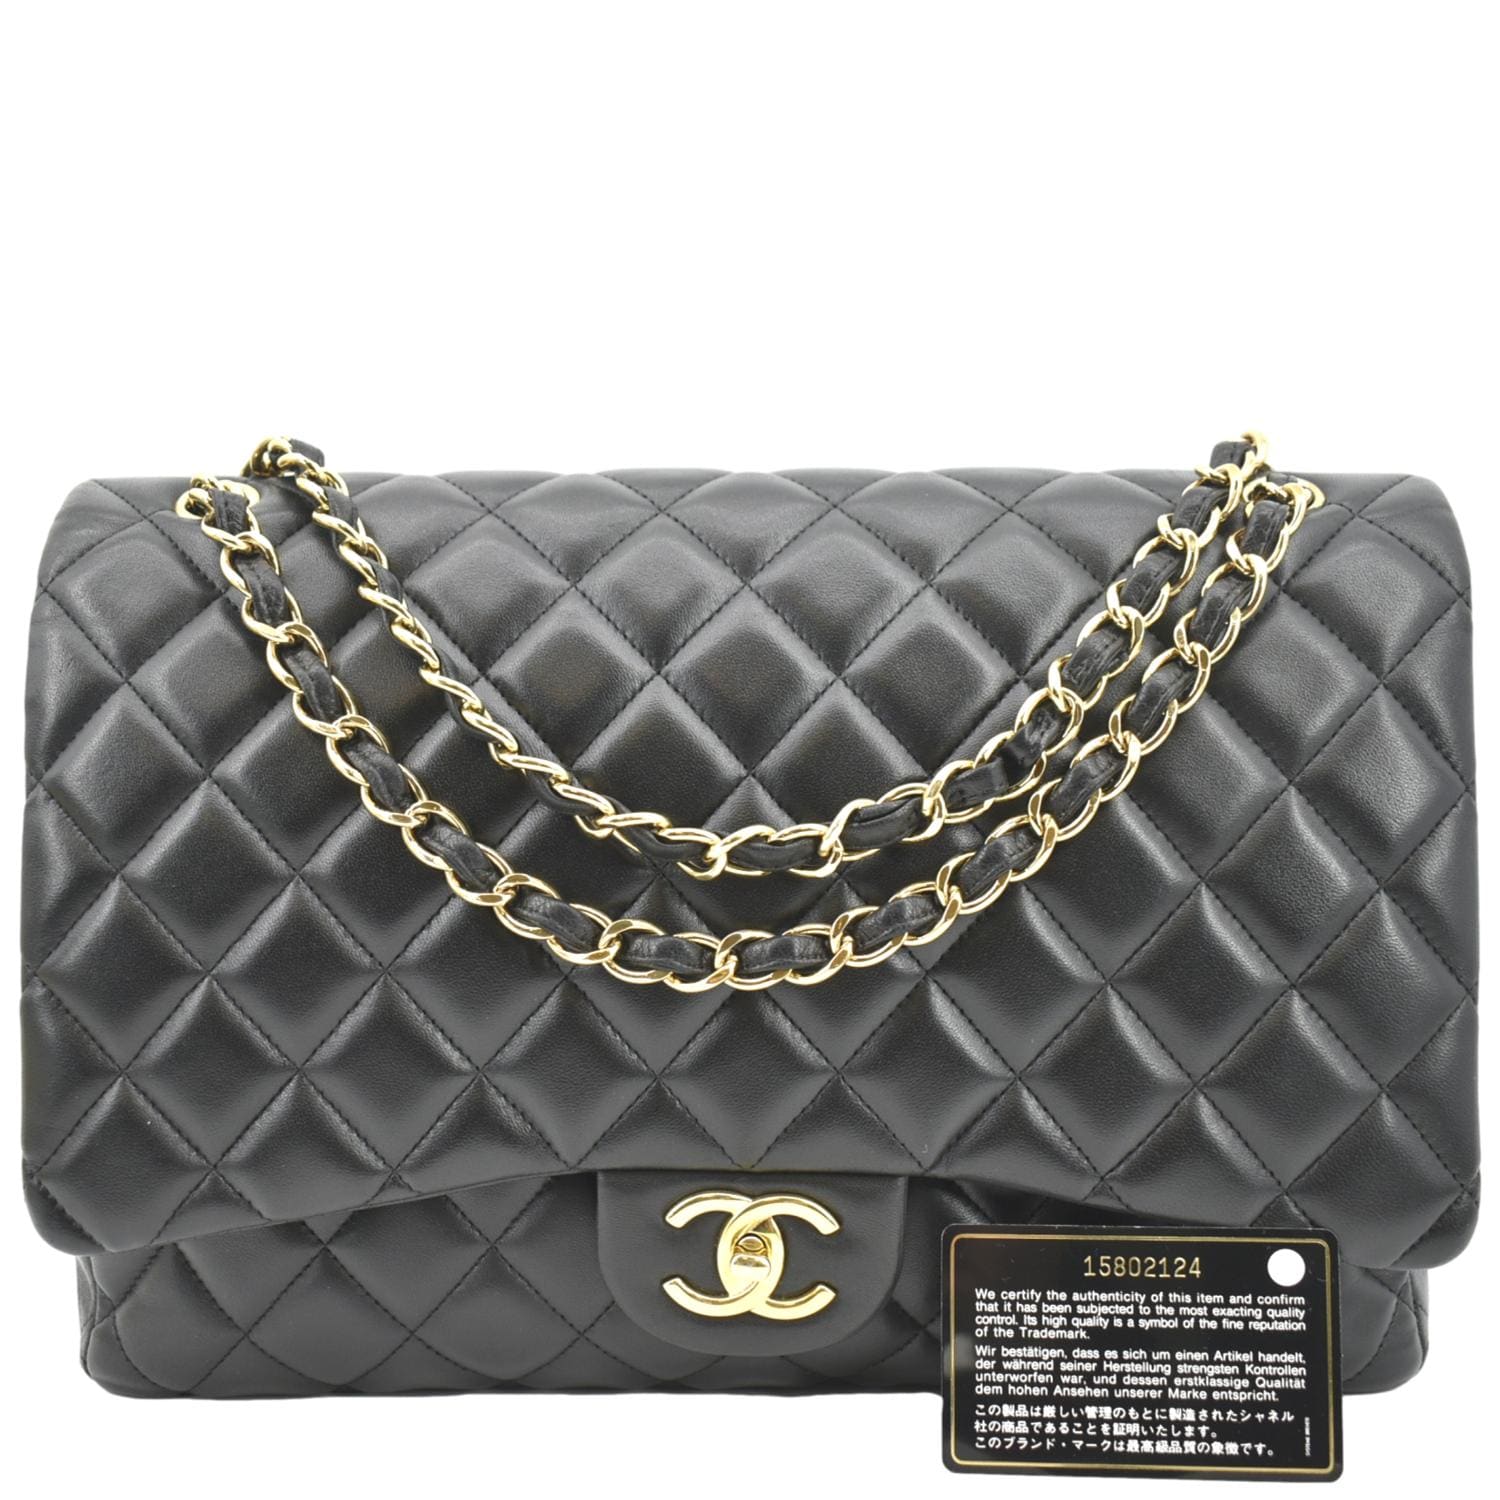 CHANEL, Bags, Chanel Maxi Classic Flap Bag In Lambskin